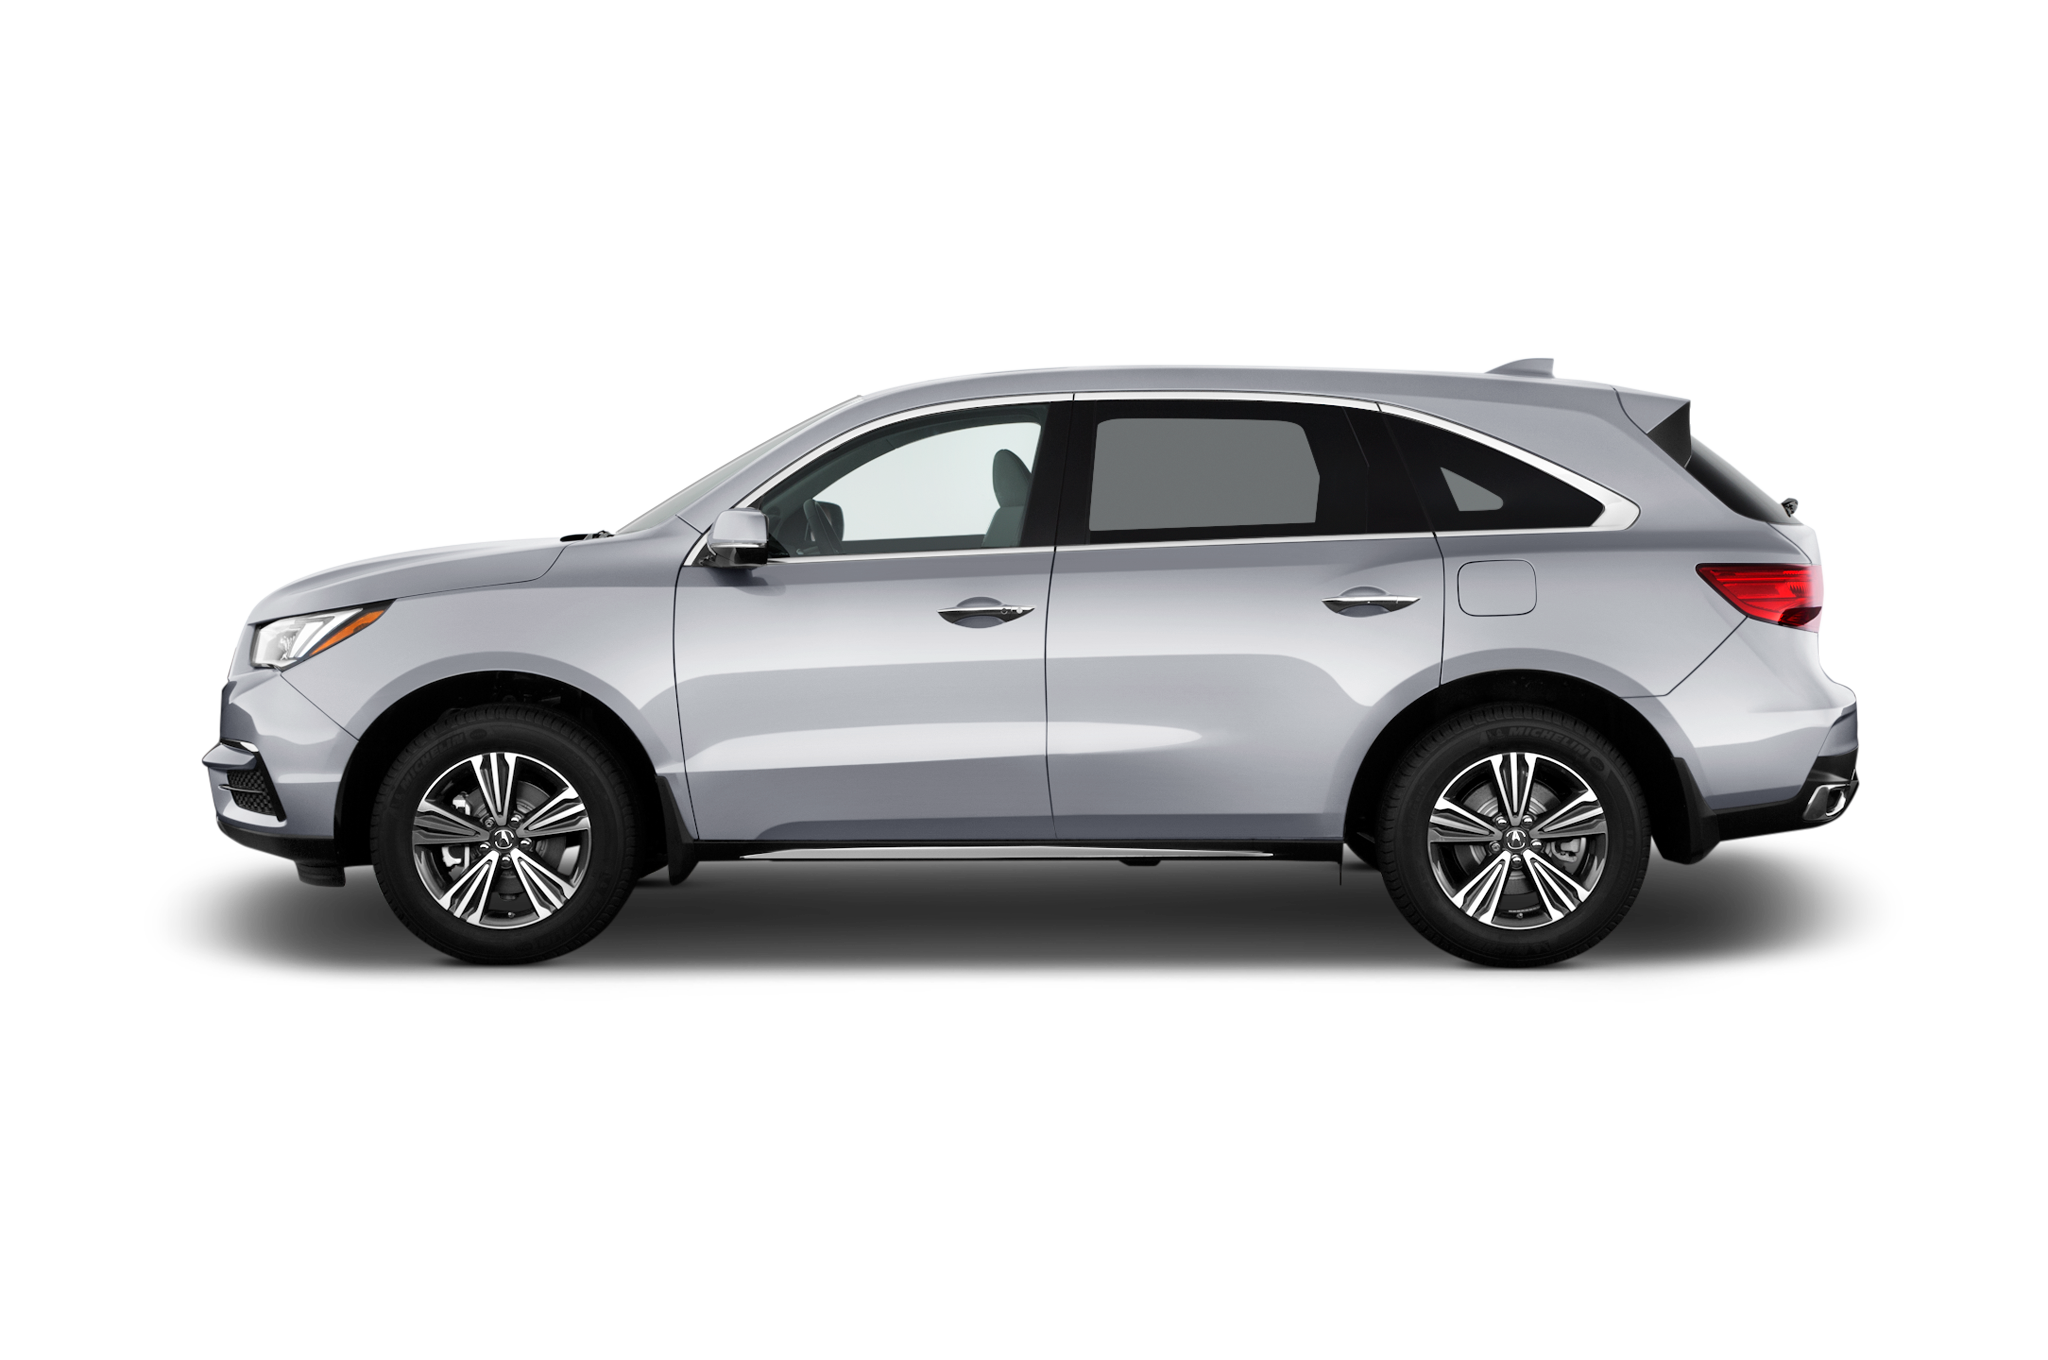 HQ Acura MDX Wallpapers | File 1027.3Kb